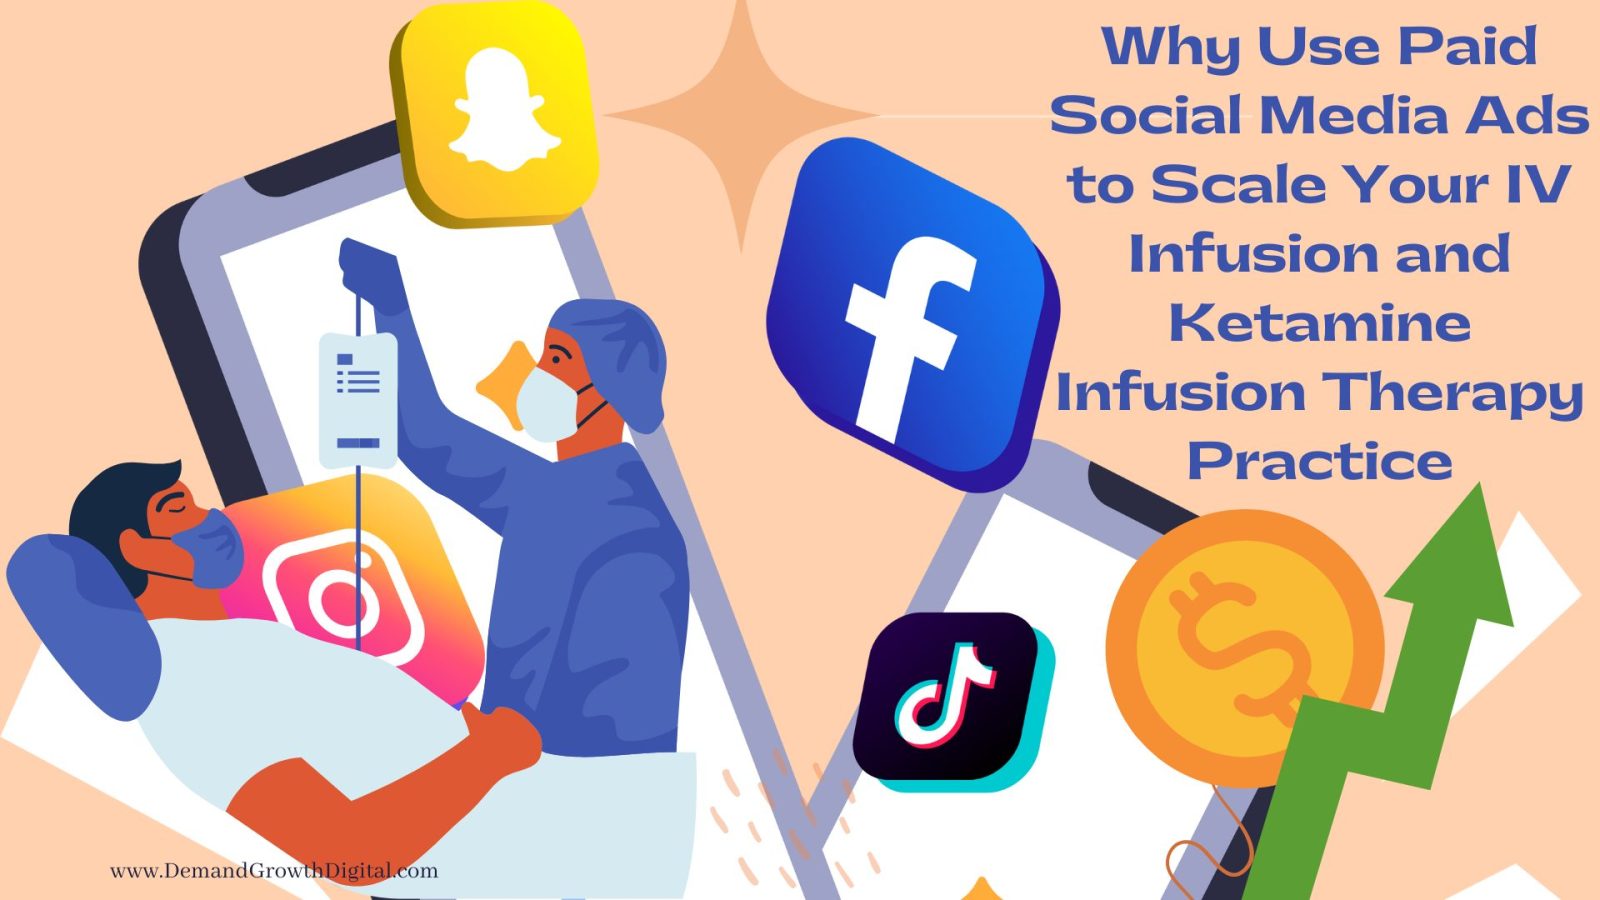 Why Use Paid Social Media Ads to Scale Your IV Infusion and Ketamine Infusion Therapy Practice